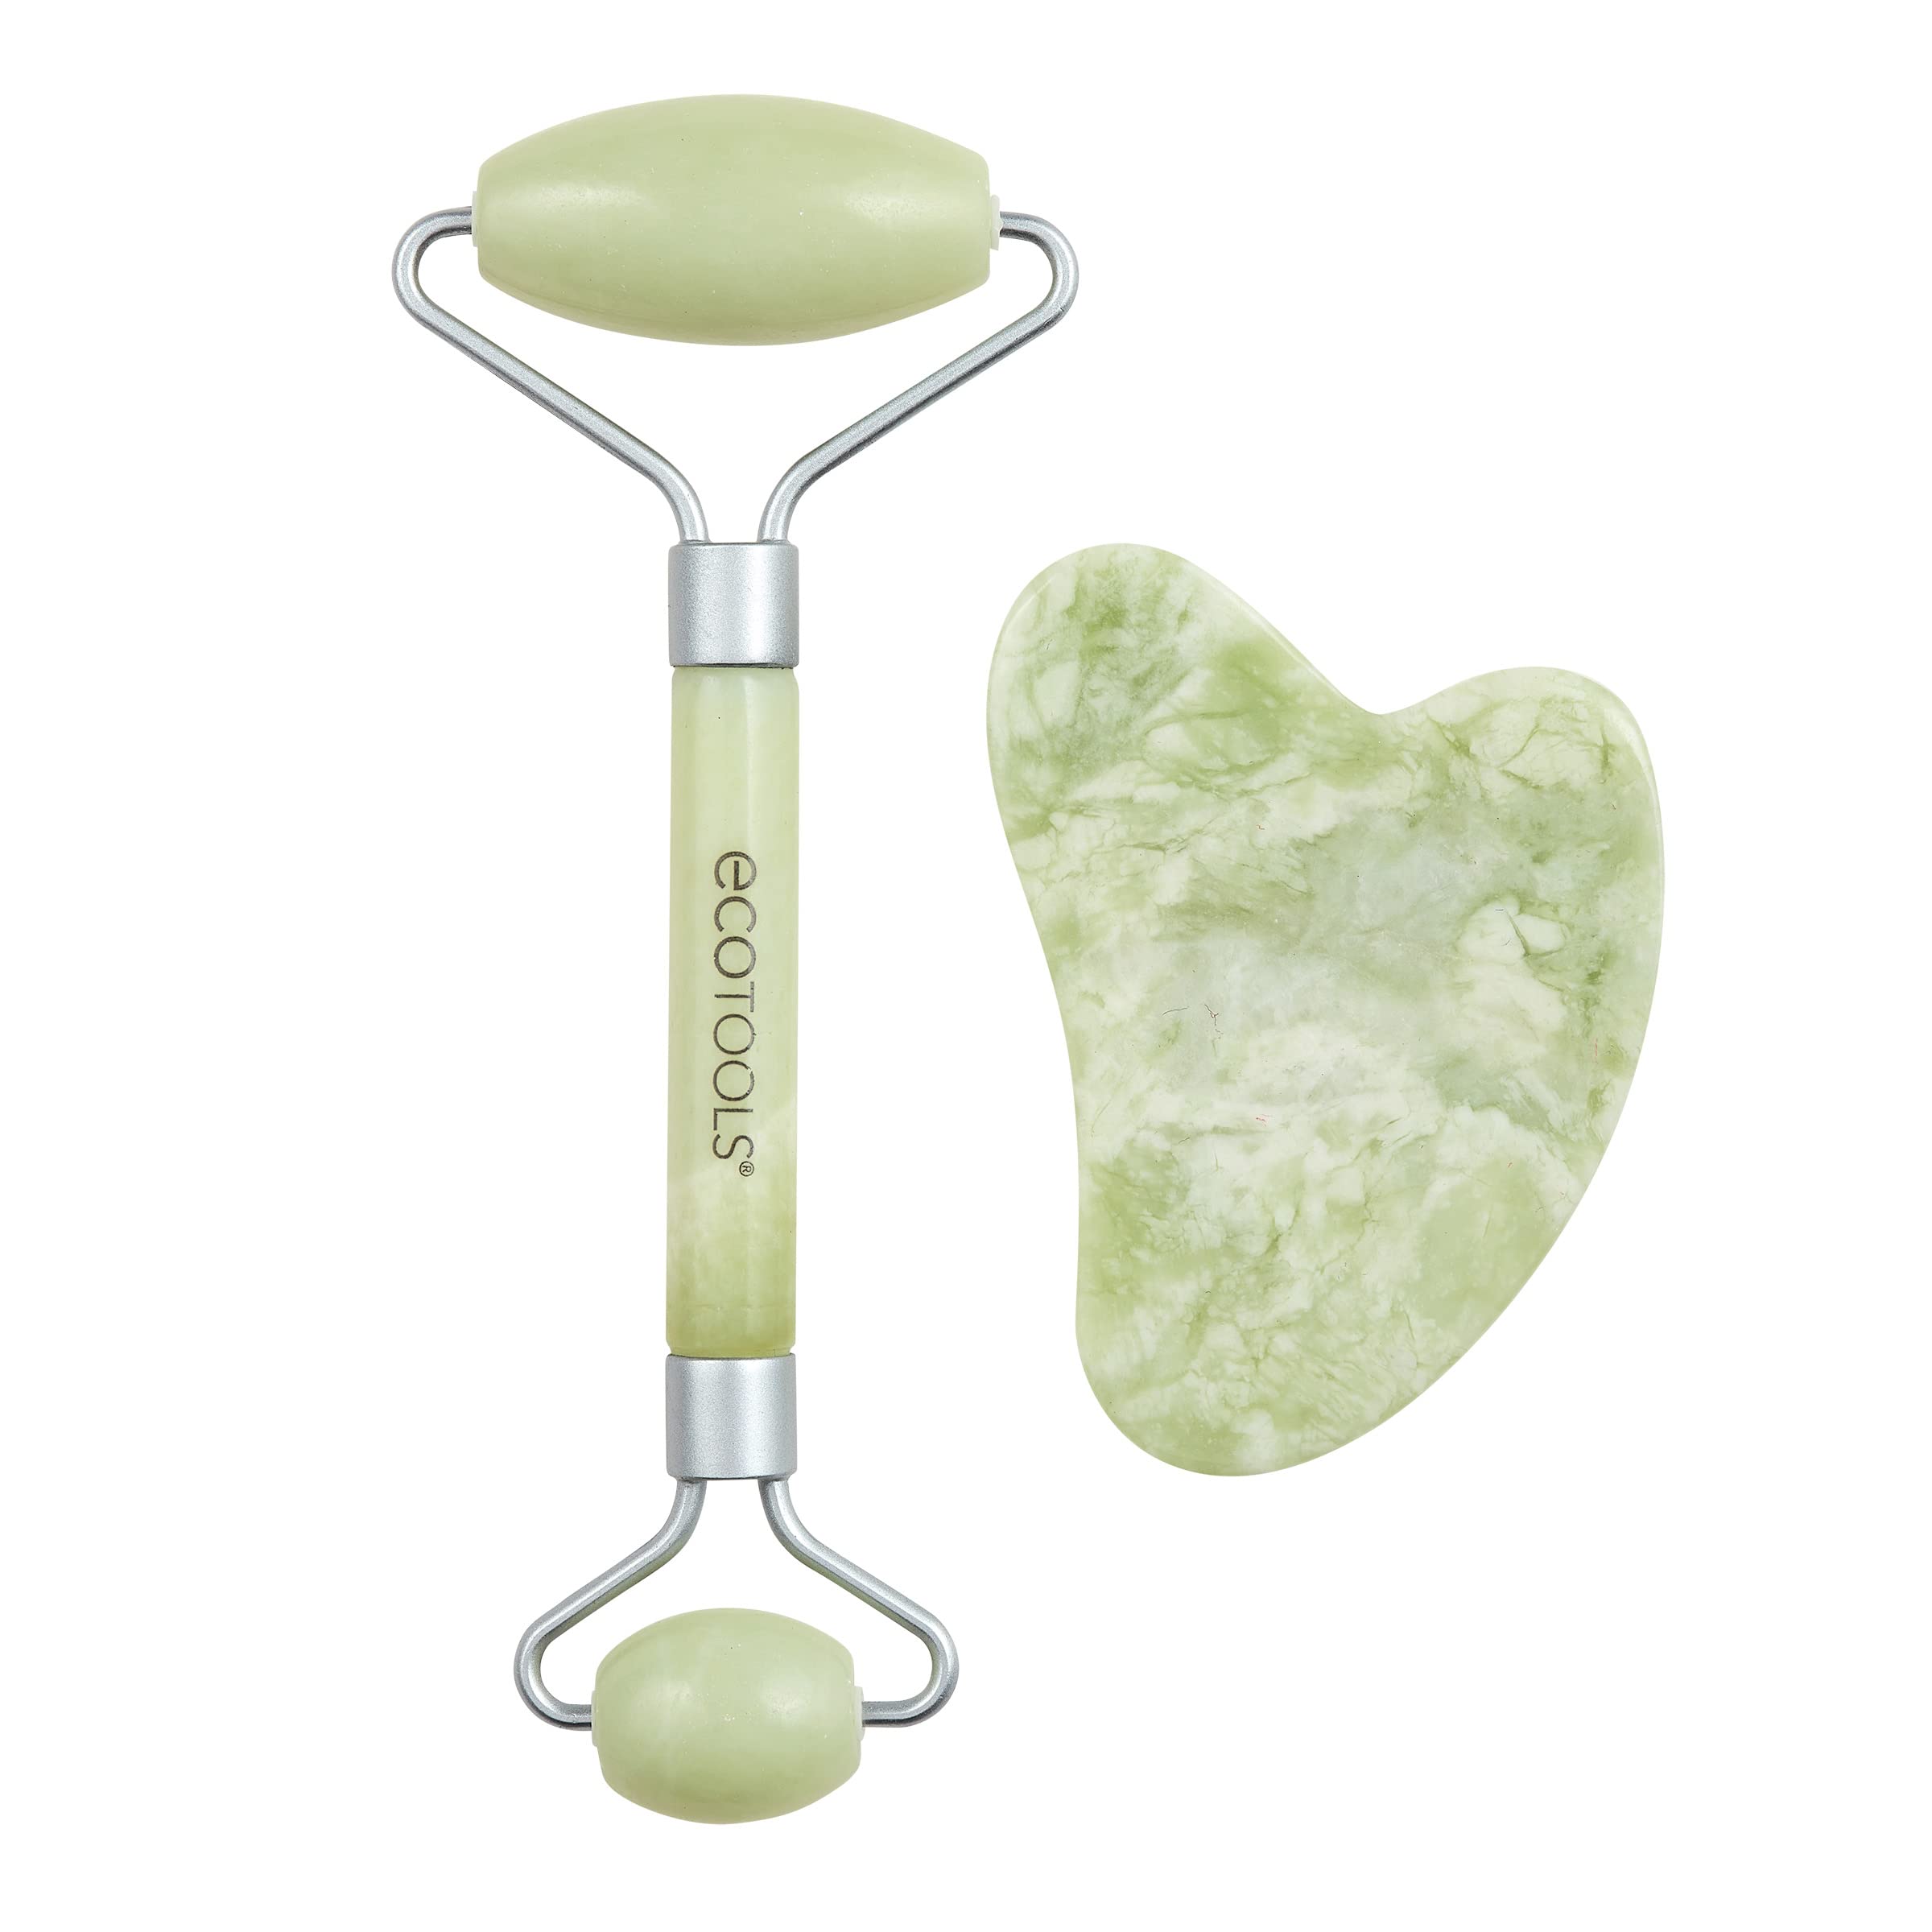 EcoTools Beauty Skin Care Tool Jade Facial Roller and Gua Sha Stone Duo, Face Roller and Massager, Skincare and Sculpting Tools, Green, Promotes Healthy Skin, Massager, 2 Piece Set, 1 Count